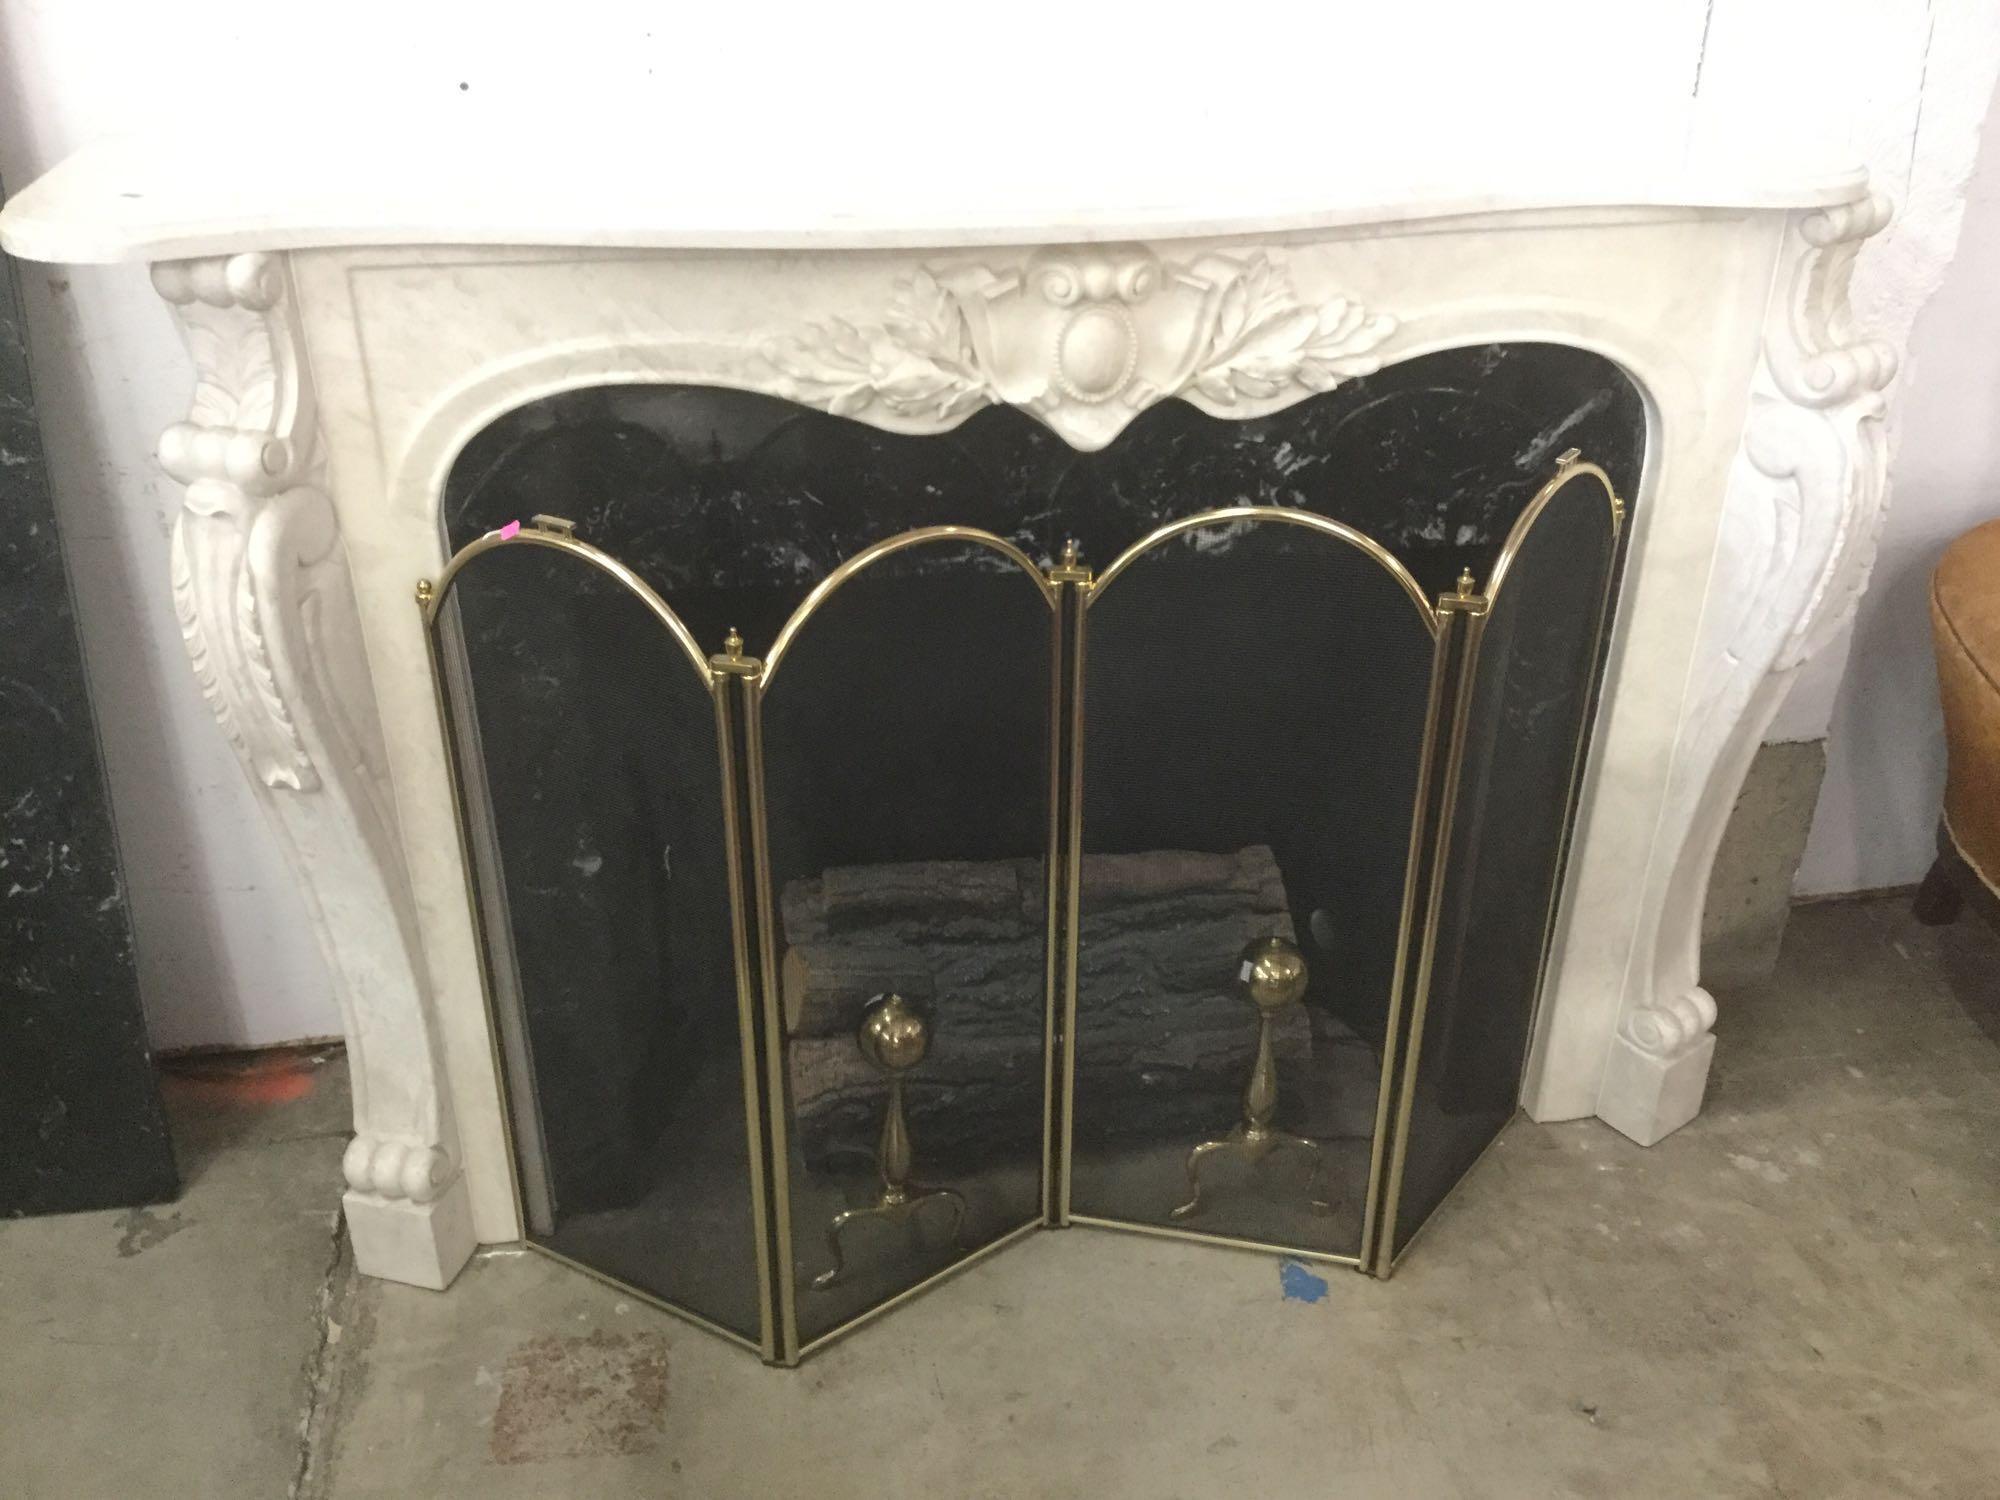 Decorative marble top electric fireplace with ornate mantle and brass screen